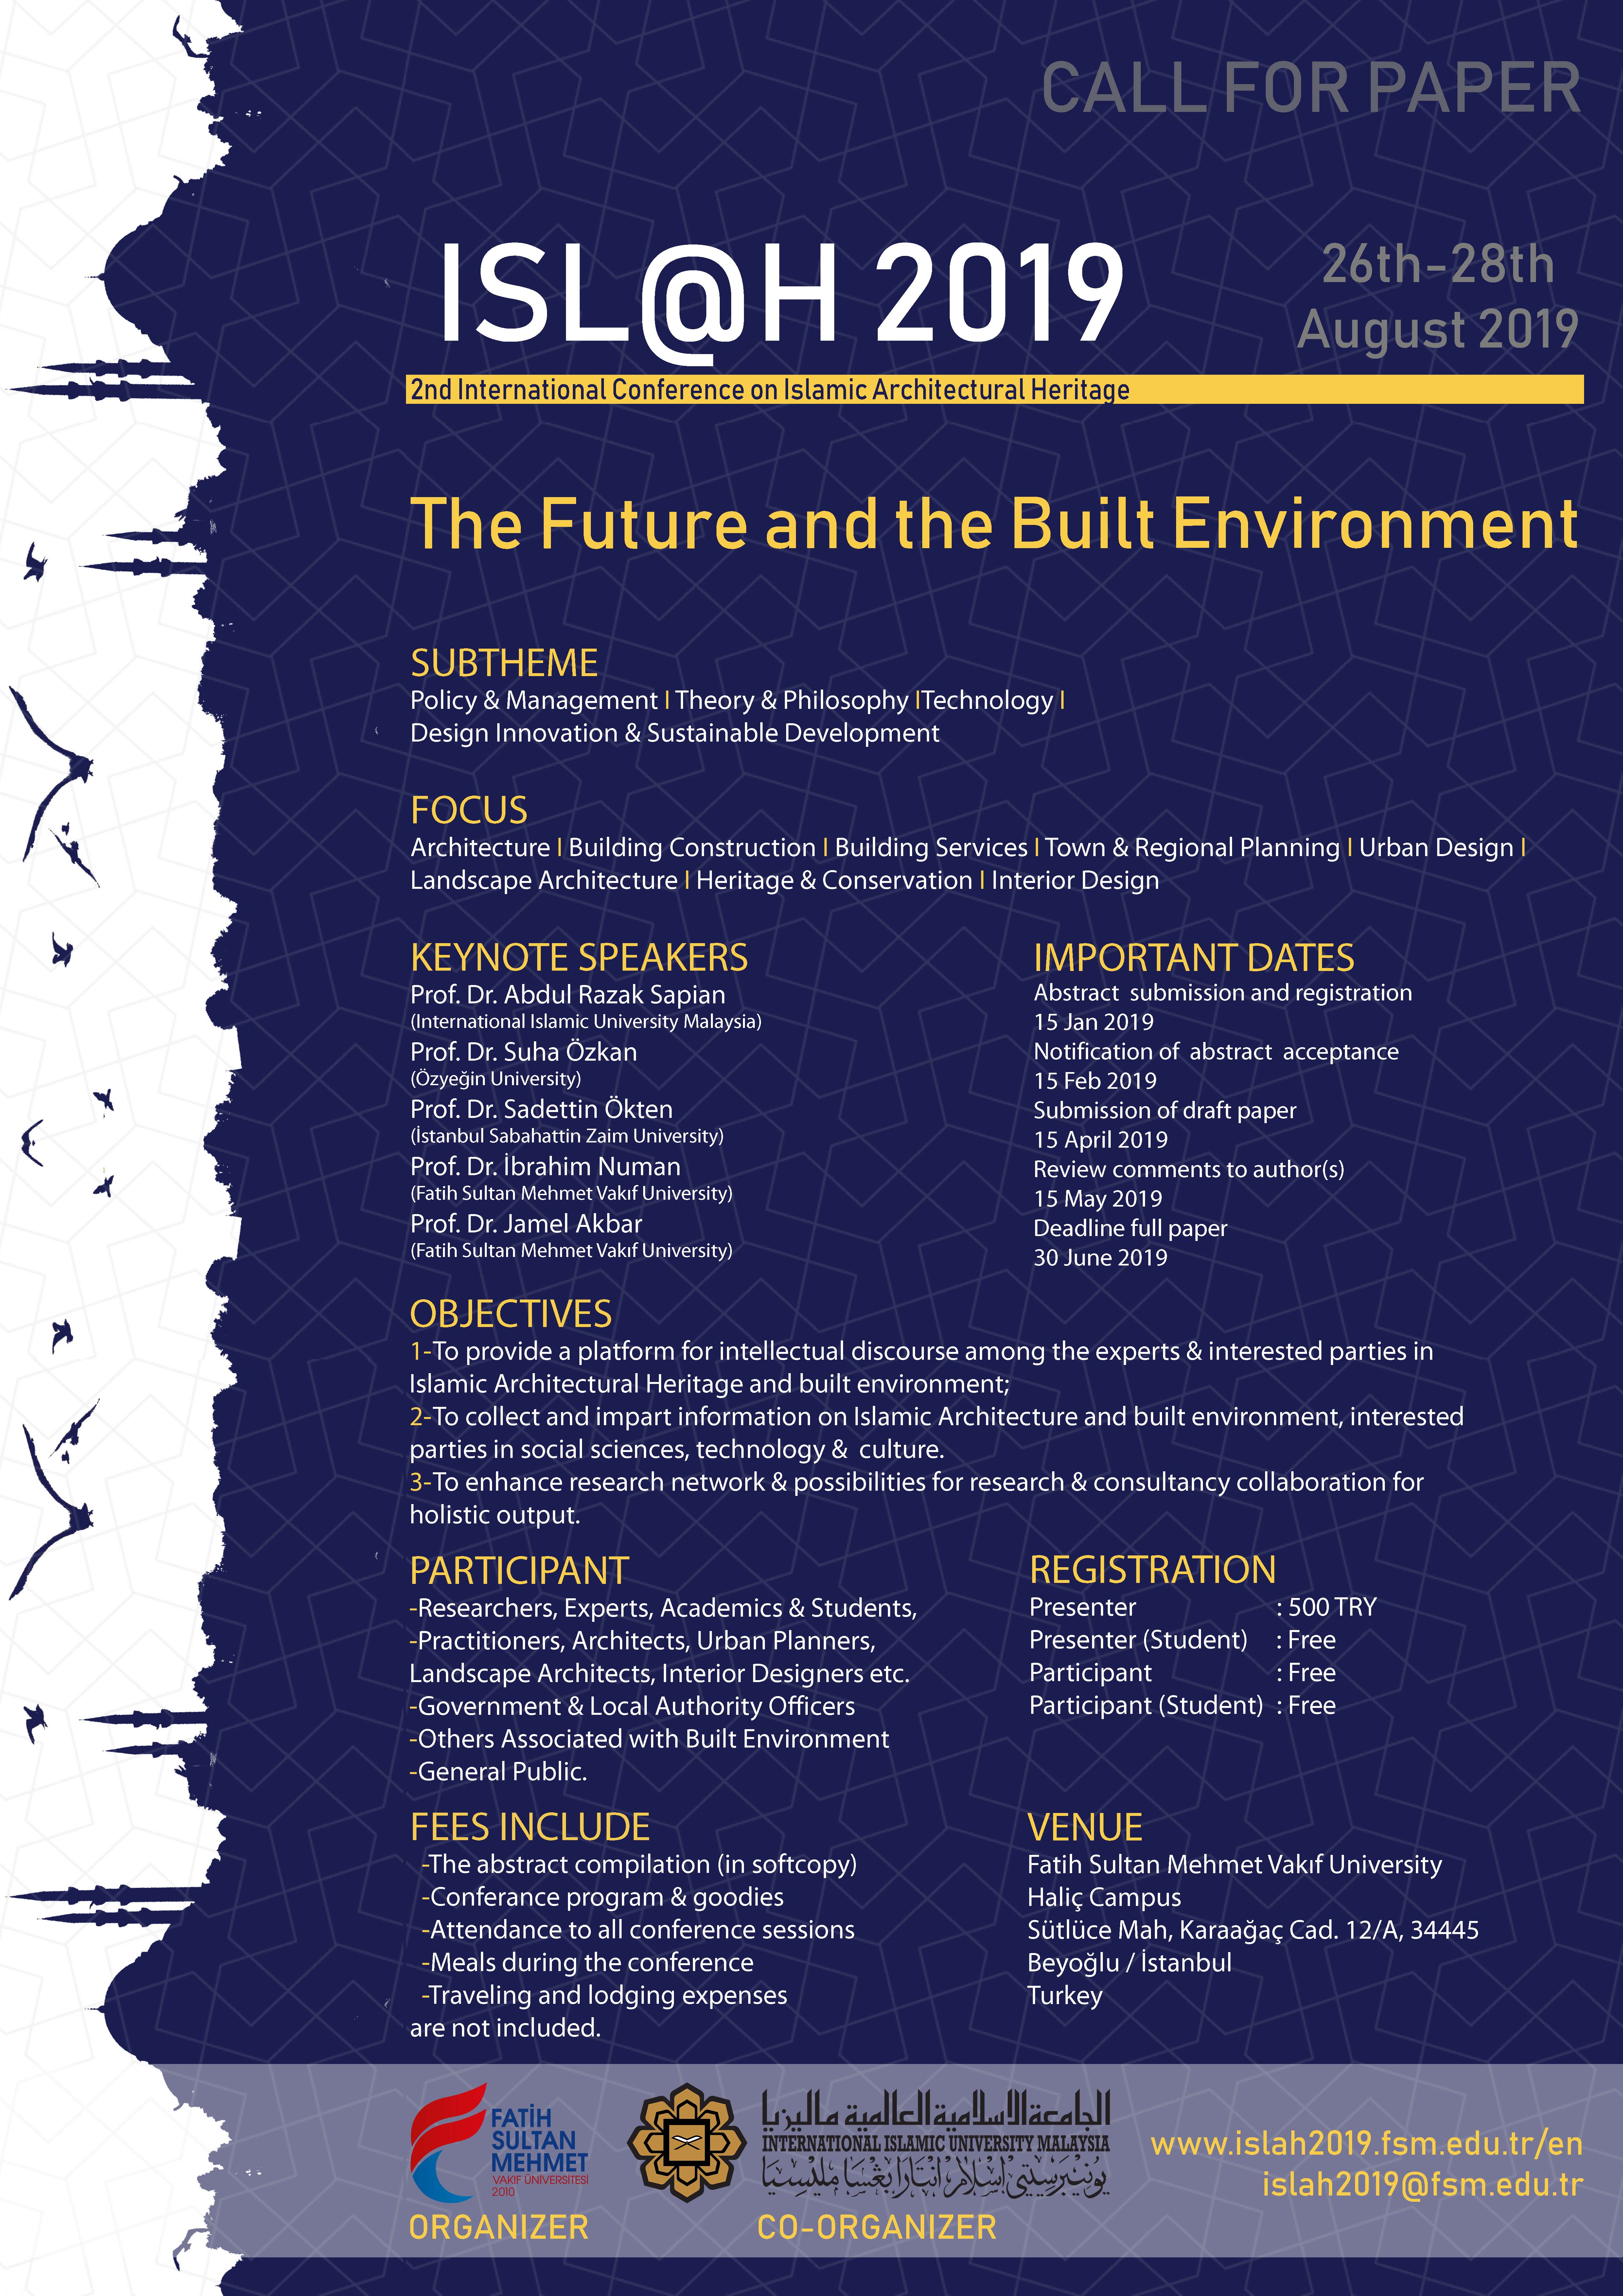 Isl@h 2019 : The Future and the Built Environment